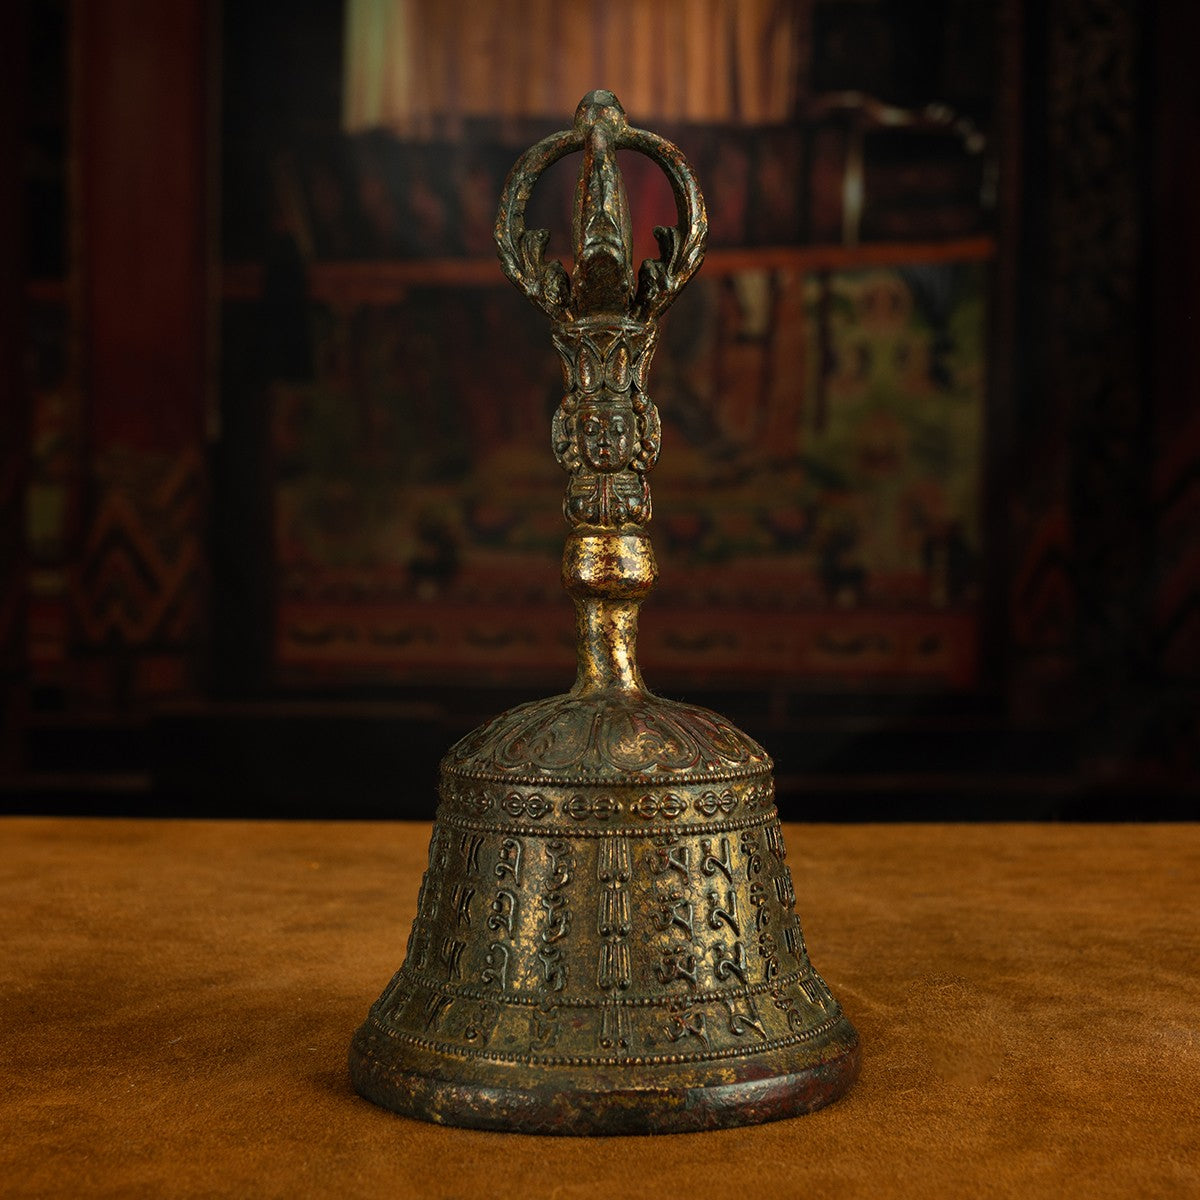 15th Century Six-Syllable Mantra Five-Pronged Tibetan Antique Vajra Demon Subduing Bell Copper Gilt From Jokhang Monastery